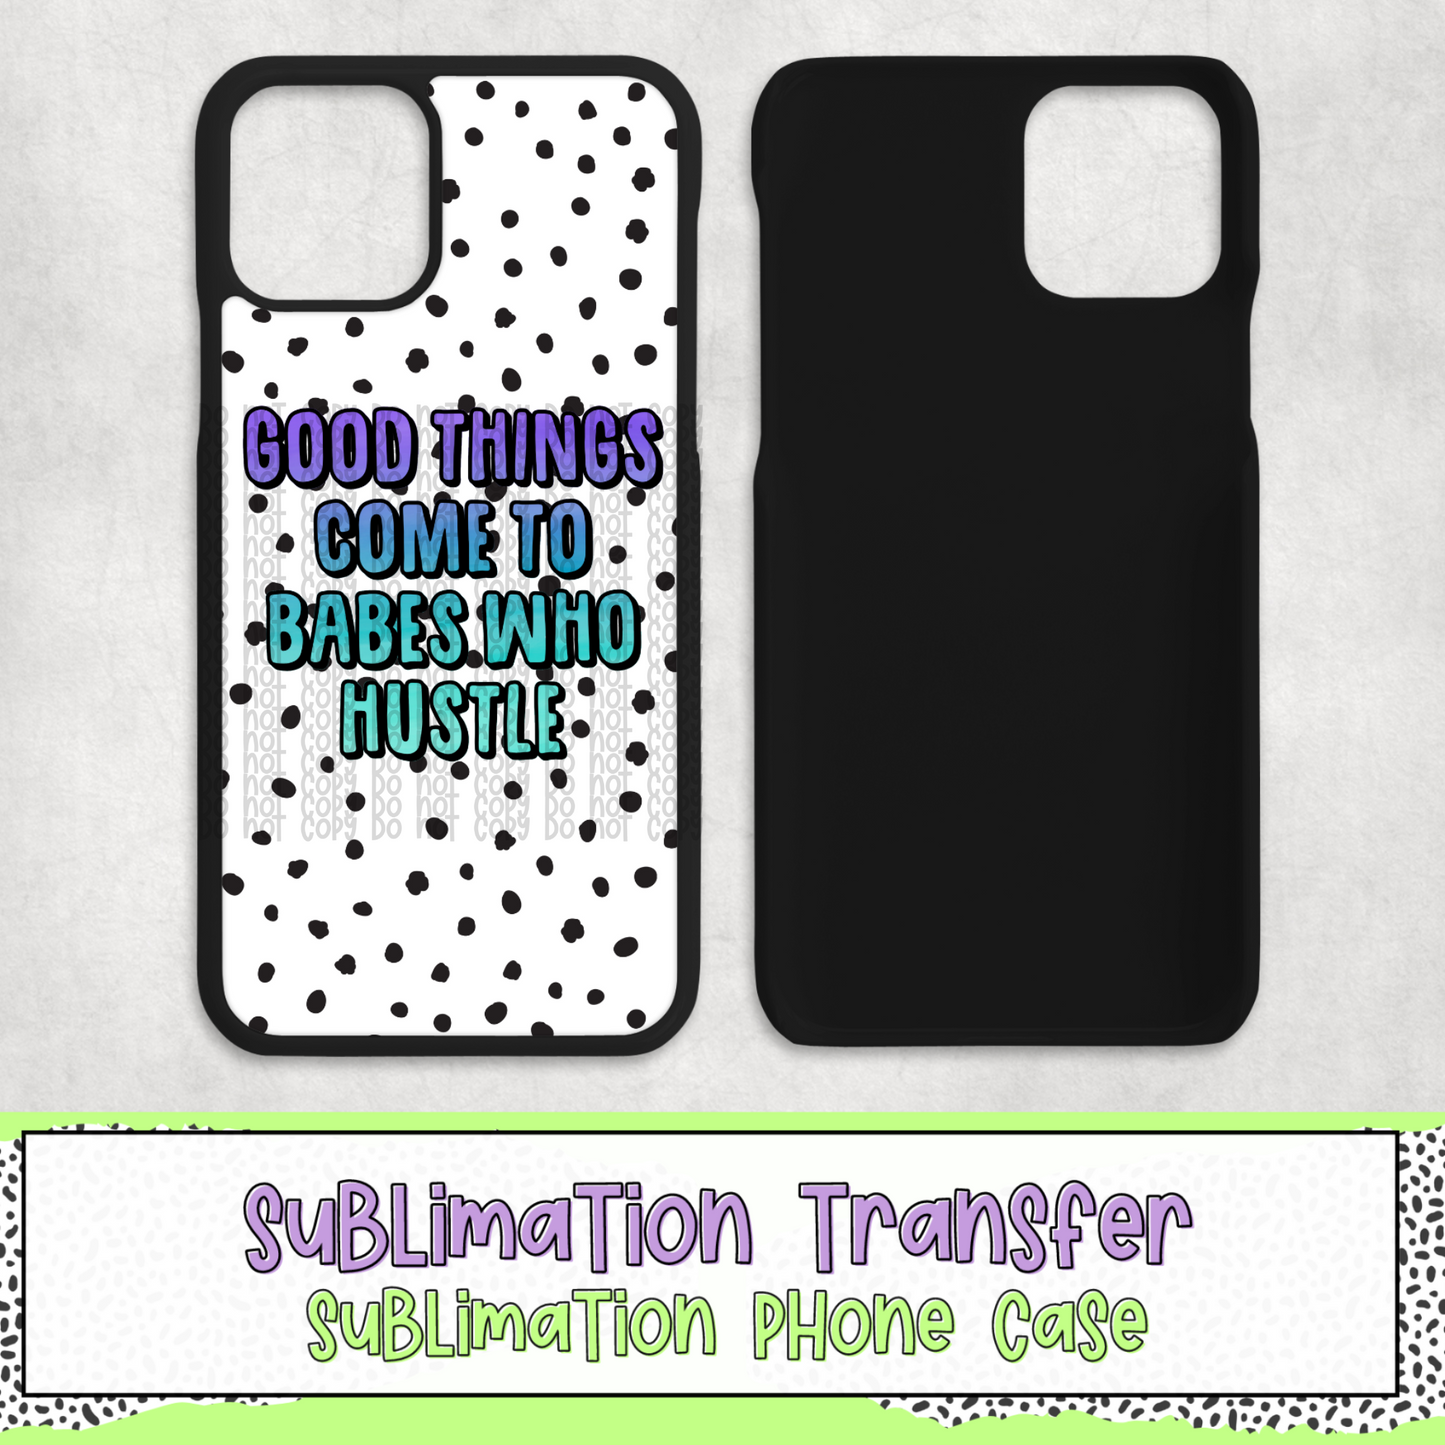 Good Things Come to Babes Who Hustle - Phone Case Sublimation Transfer - RTS